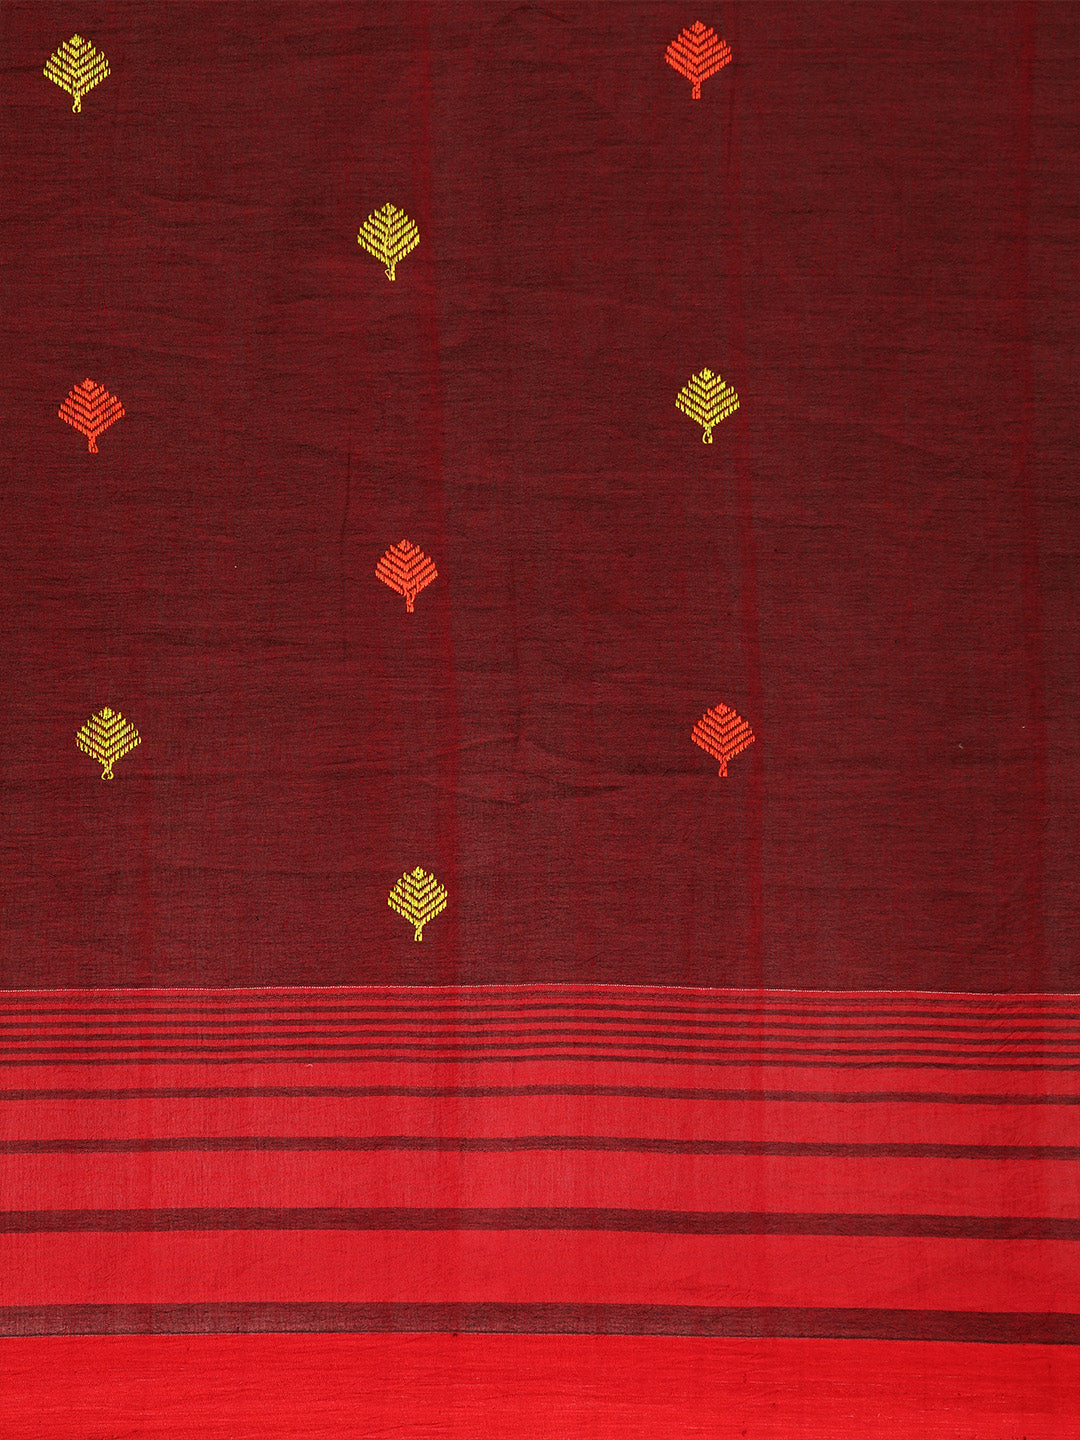 New Burgundy Yellow Handcrafted Assamese Cotton  Saree with pompoms